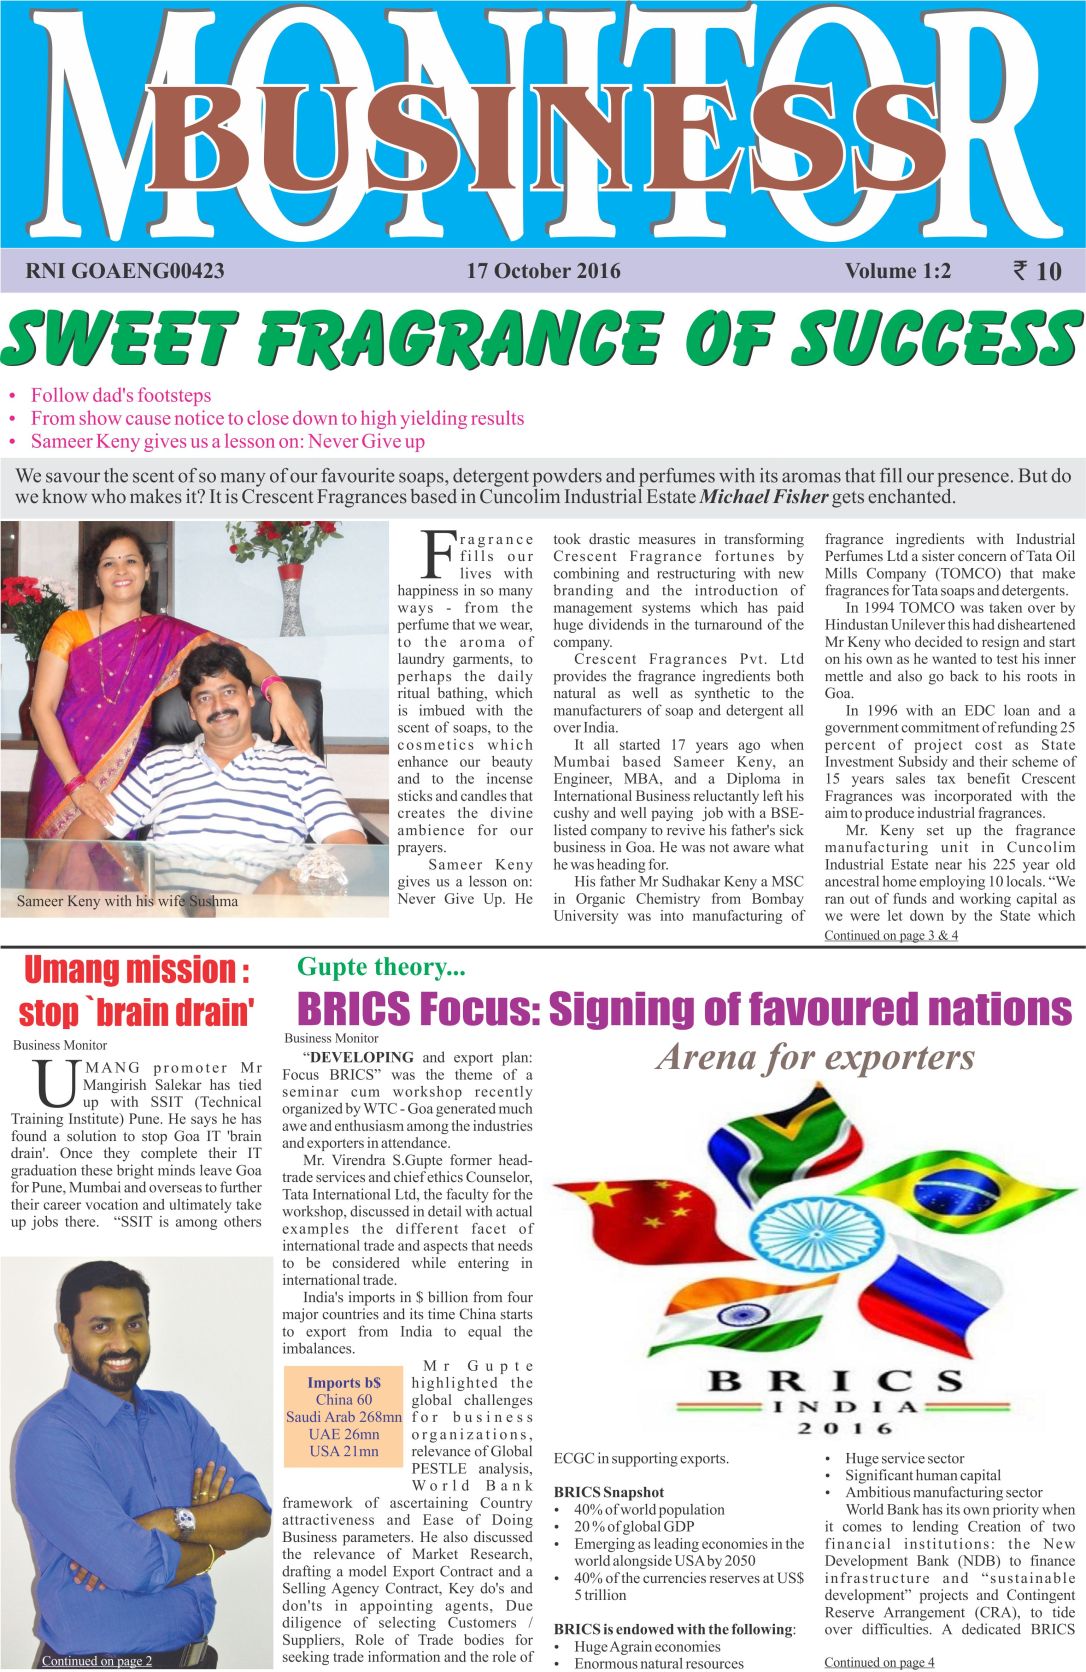 Business Monitor Cover story Page 1